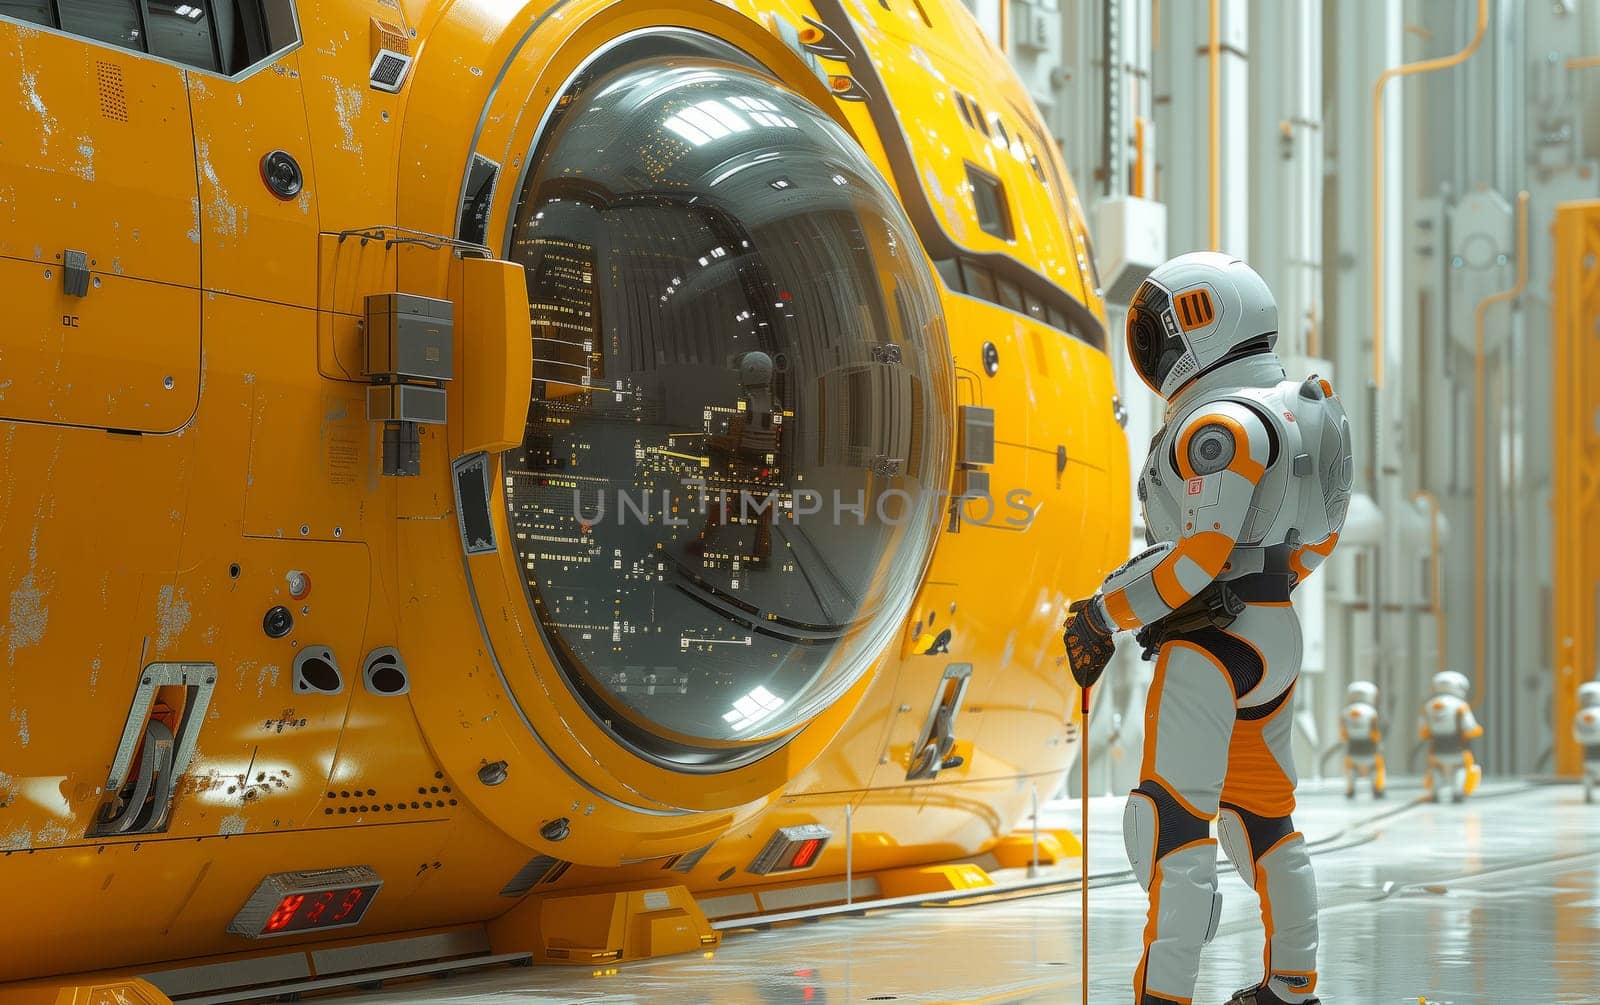 A man in workwear and a space suit is standing in front of a yellow vehicle, an engineering marvel ready for space exploration